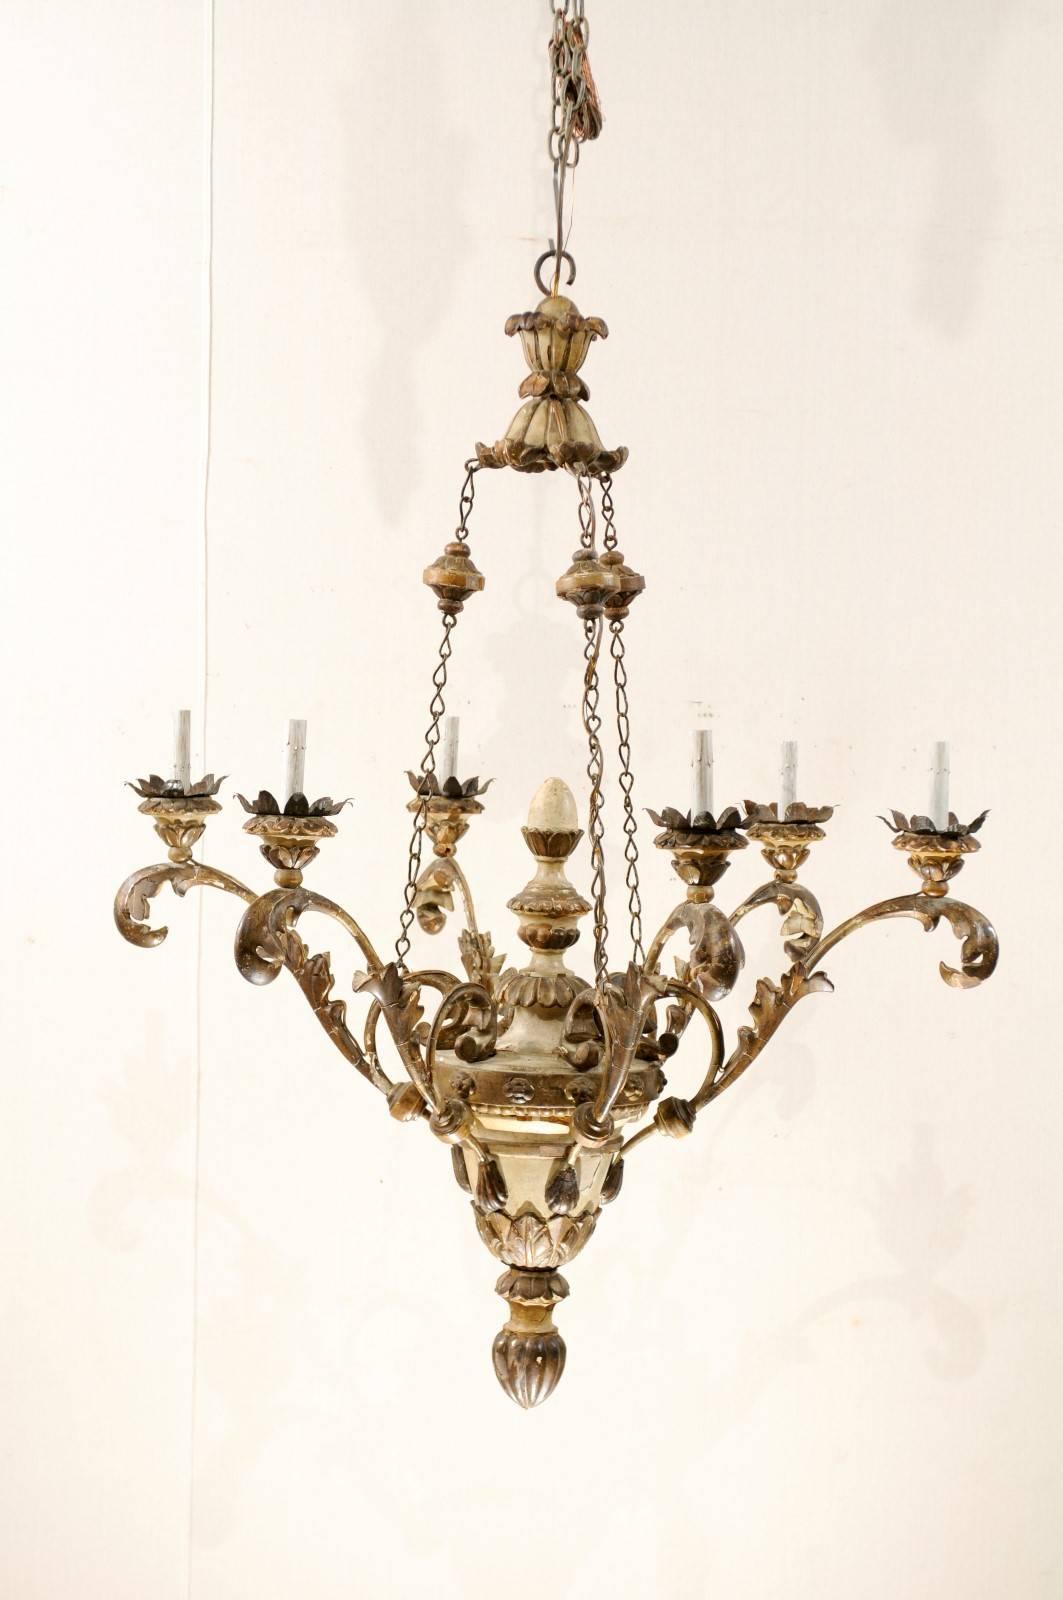 An exquisite pair of nice-sized Italian six-light chandeliers. This pair of early 20th century Italian chandeliers are simply breathtaking and together make quite an impactful statement. Their wooden urn shaped bodies give rise to six splayed arms,